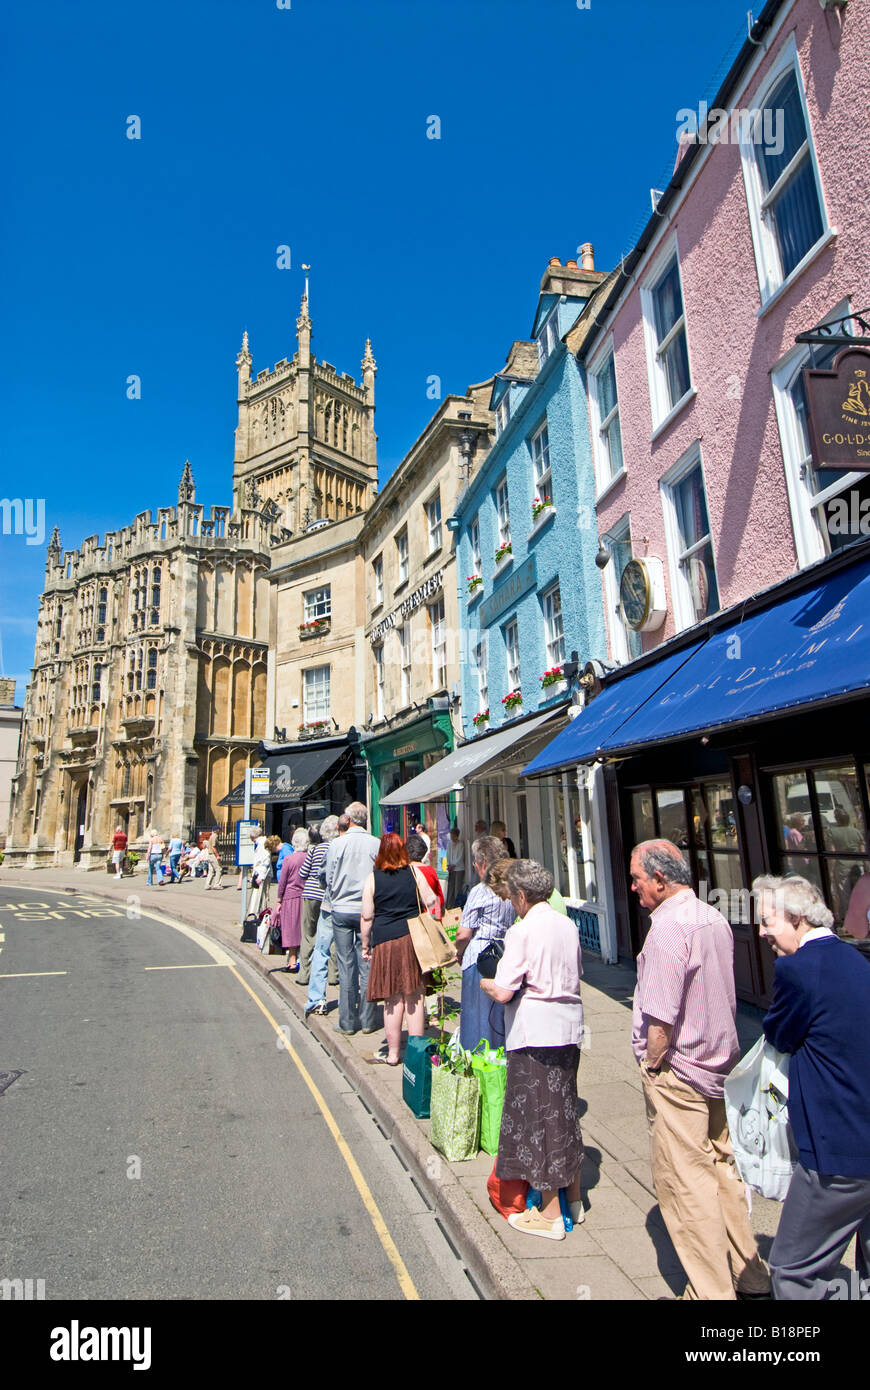 Queue at a bus stop in Market Square, Cirencester, Gloucestershire, England Stock Photo